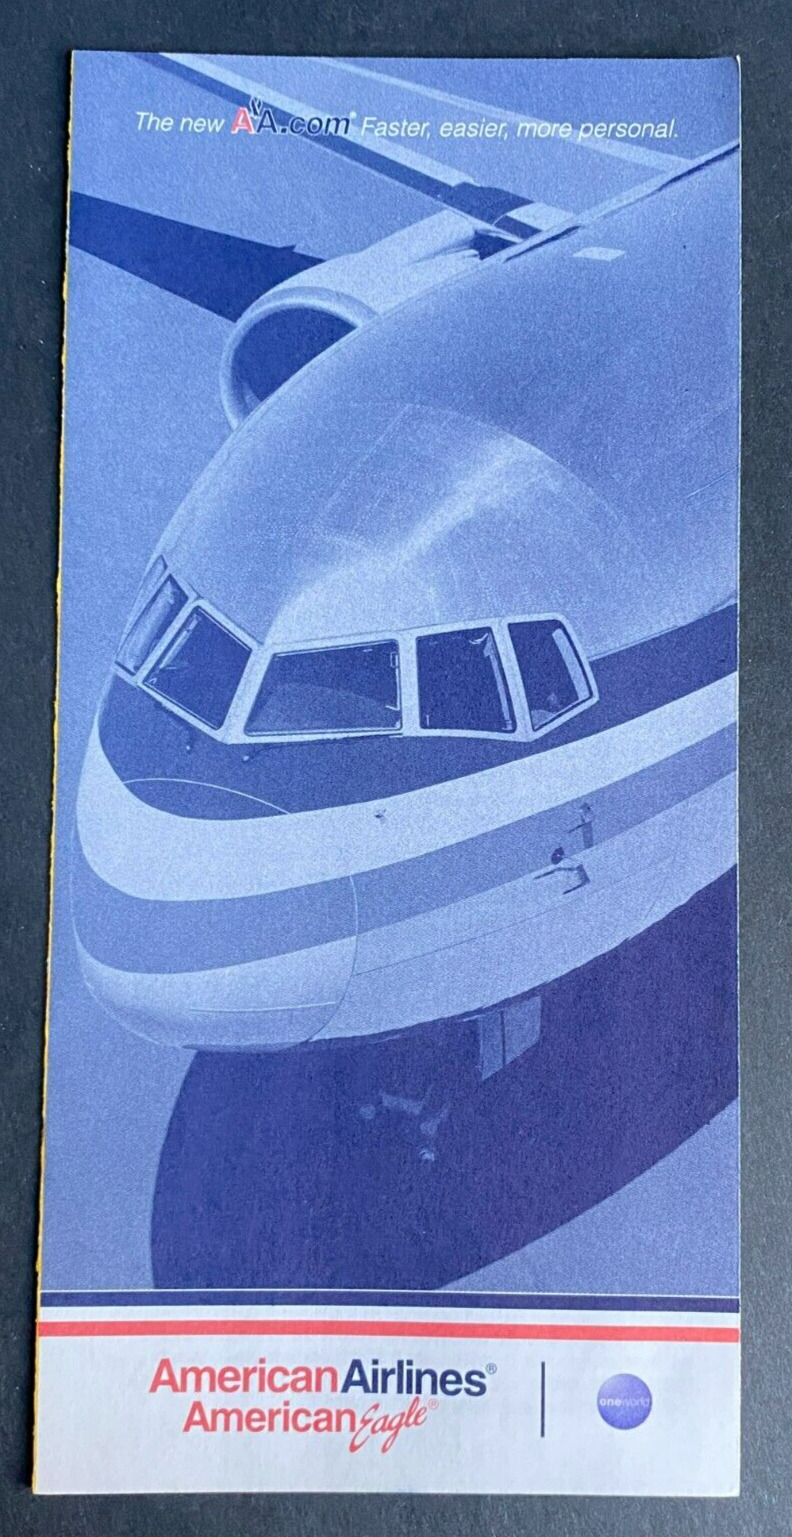 American Airlines Ticket Jacket - Boeing 767 Nose Cover (AK2 | c2002)